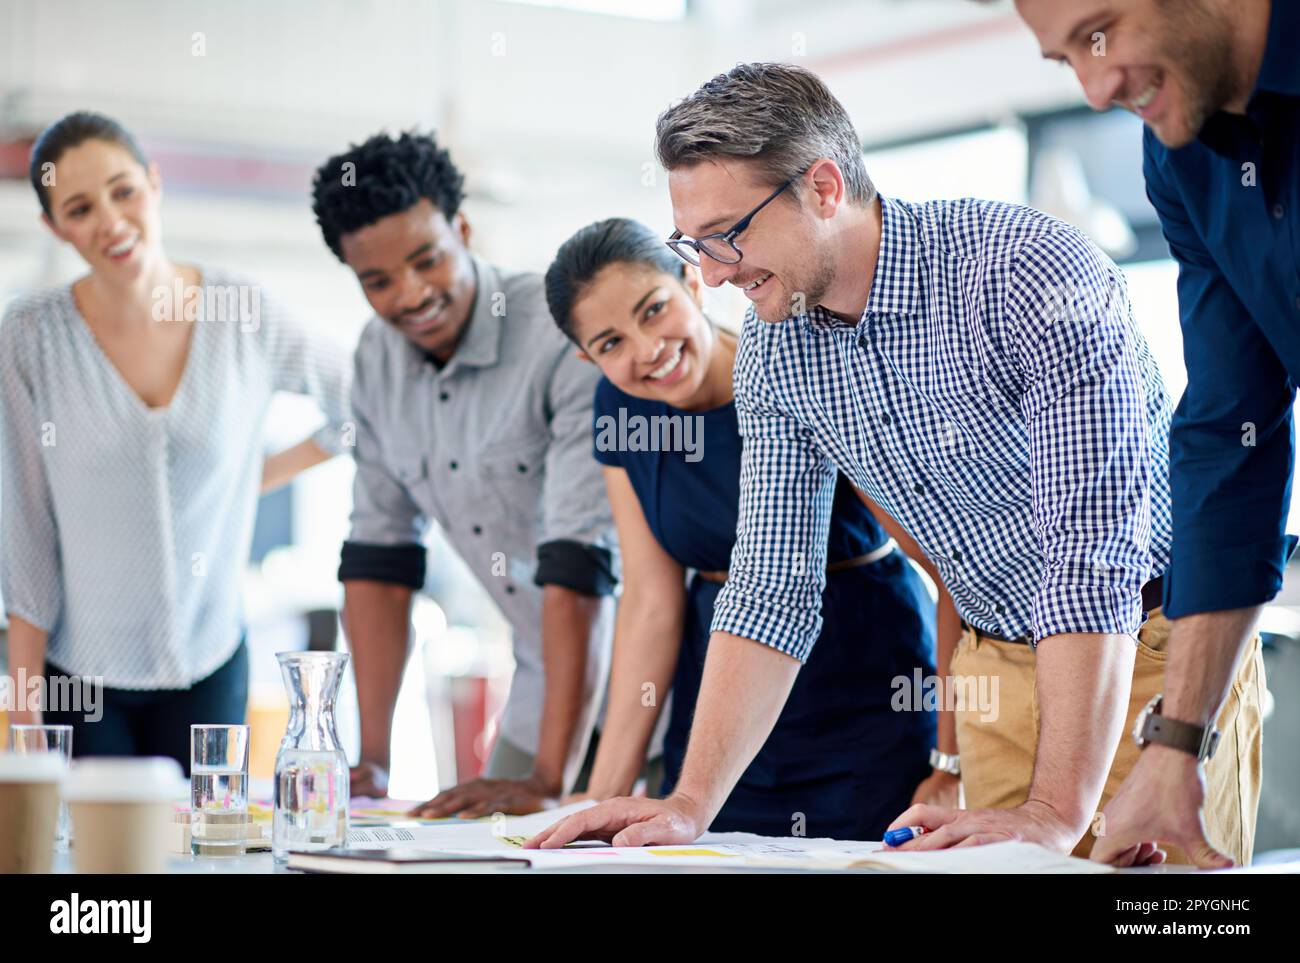 Gathering the staff for some impromptu planning. Diverse group of creative professionals standing at a table for an impromptu planning session. Stock Photo